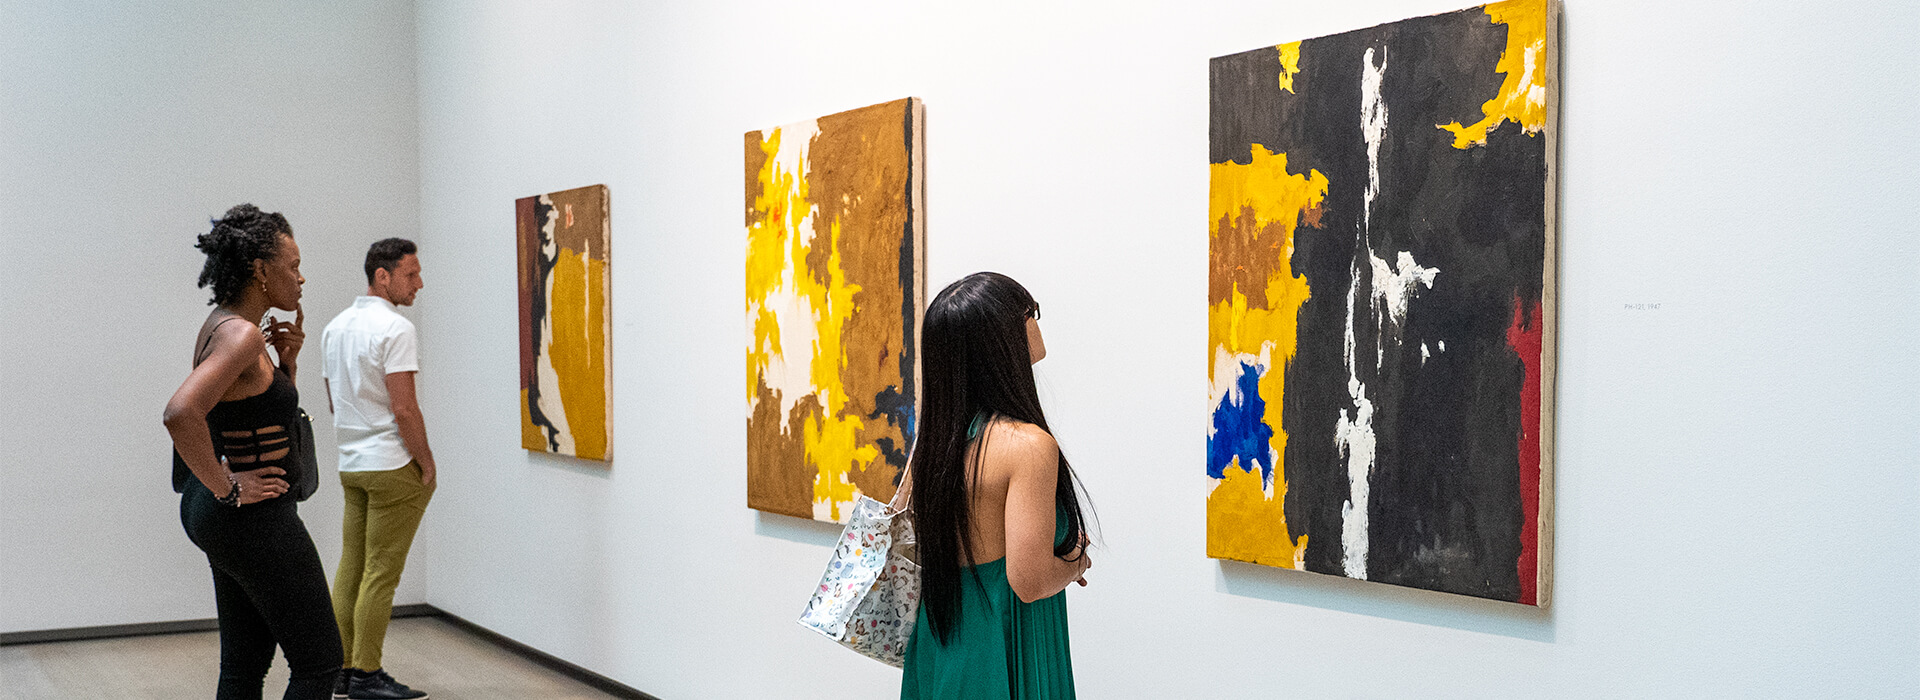 A woman wearing a green dress, another woman dressed in black top and black pants, and a man wearing tan pants and a white shirt all look pensively at three abstract paintings on a wall